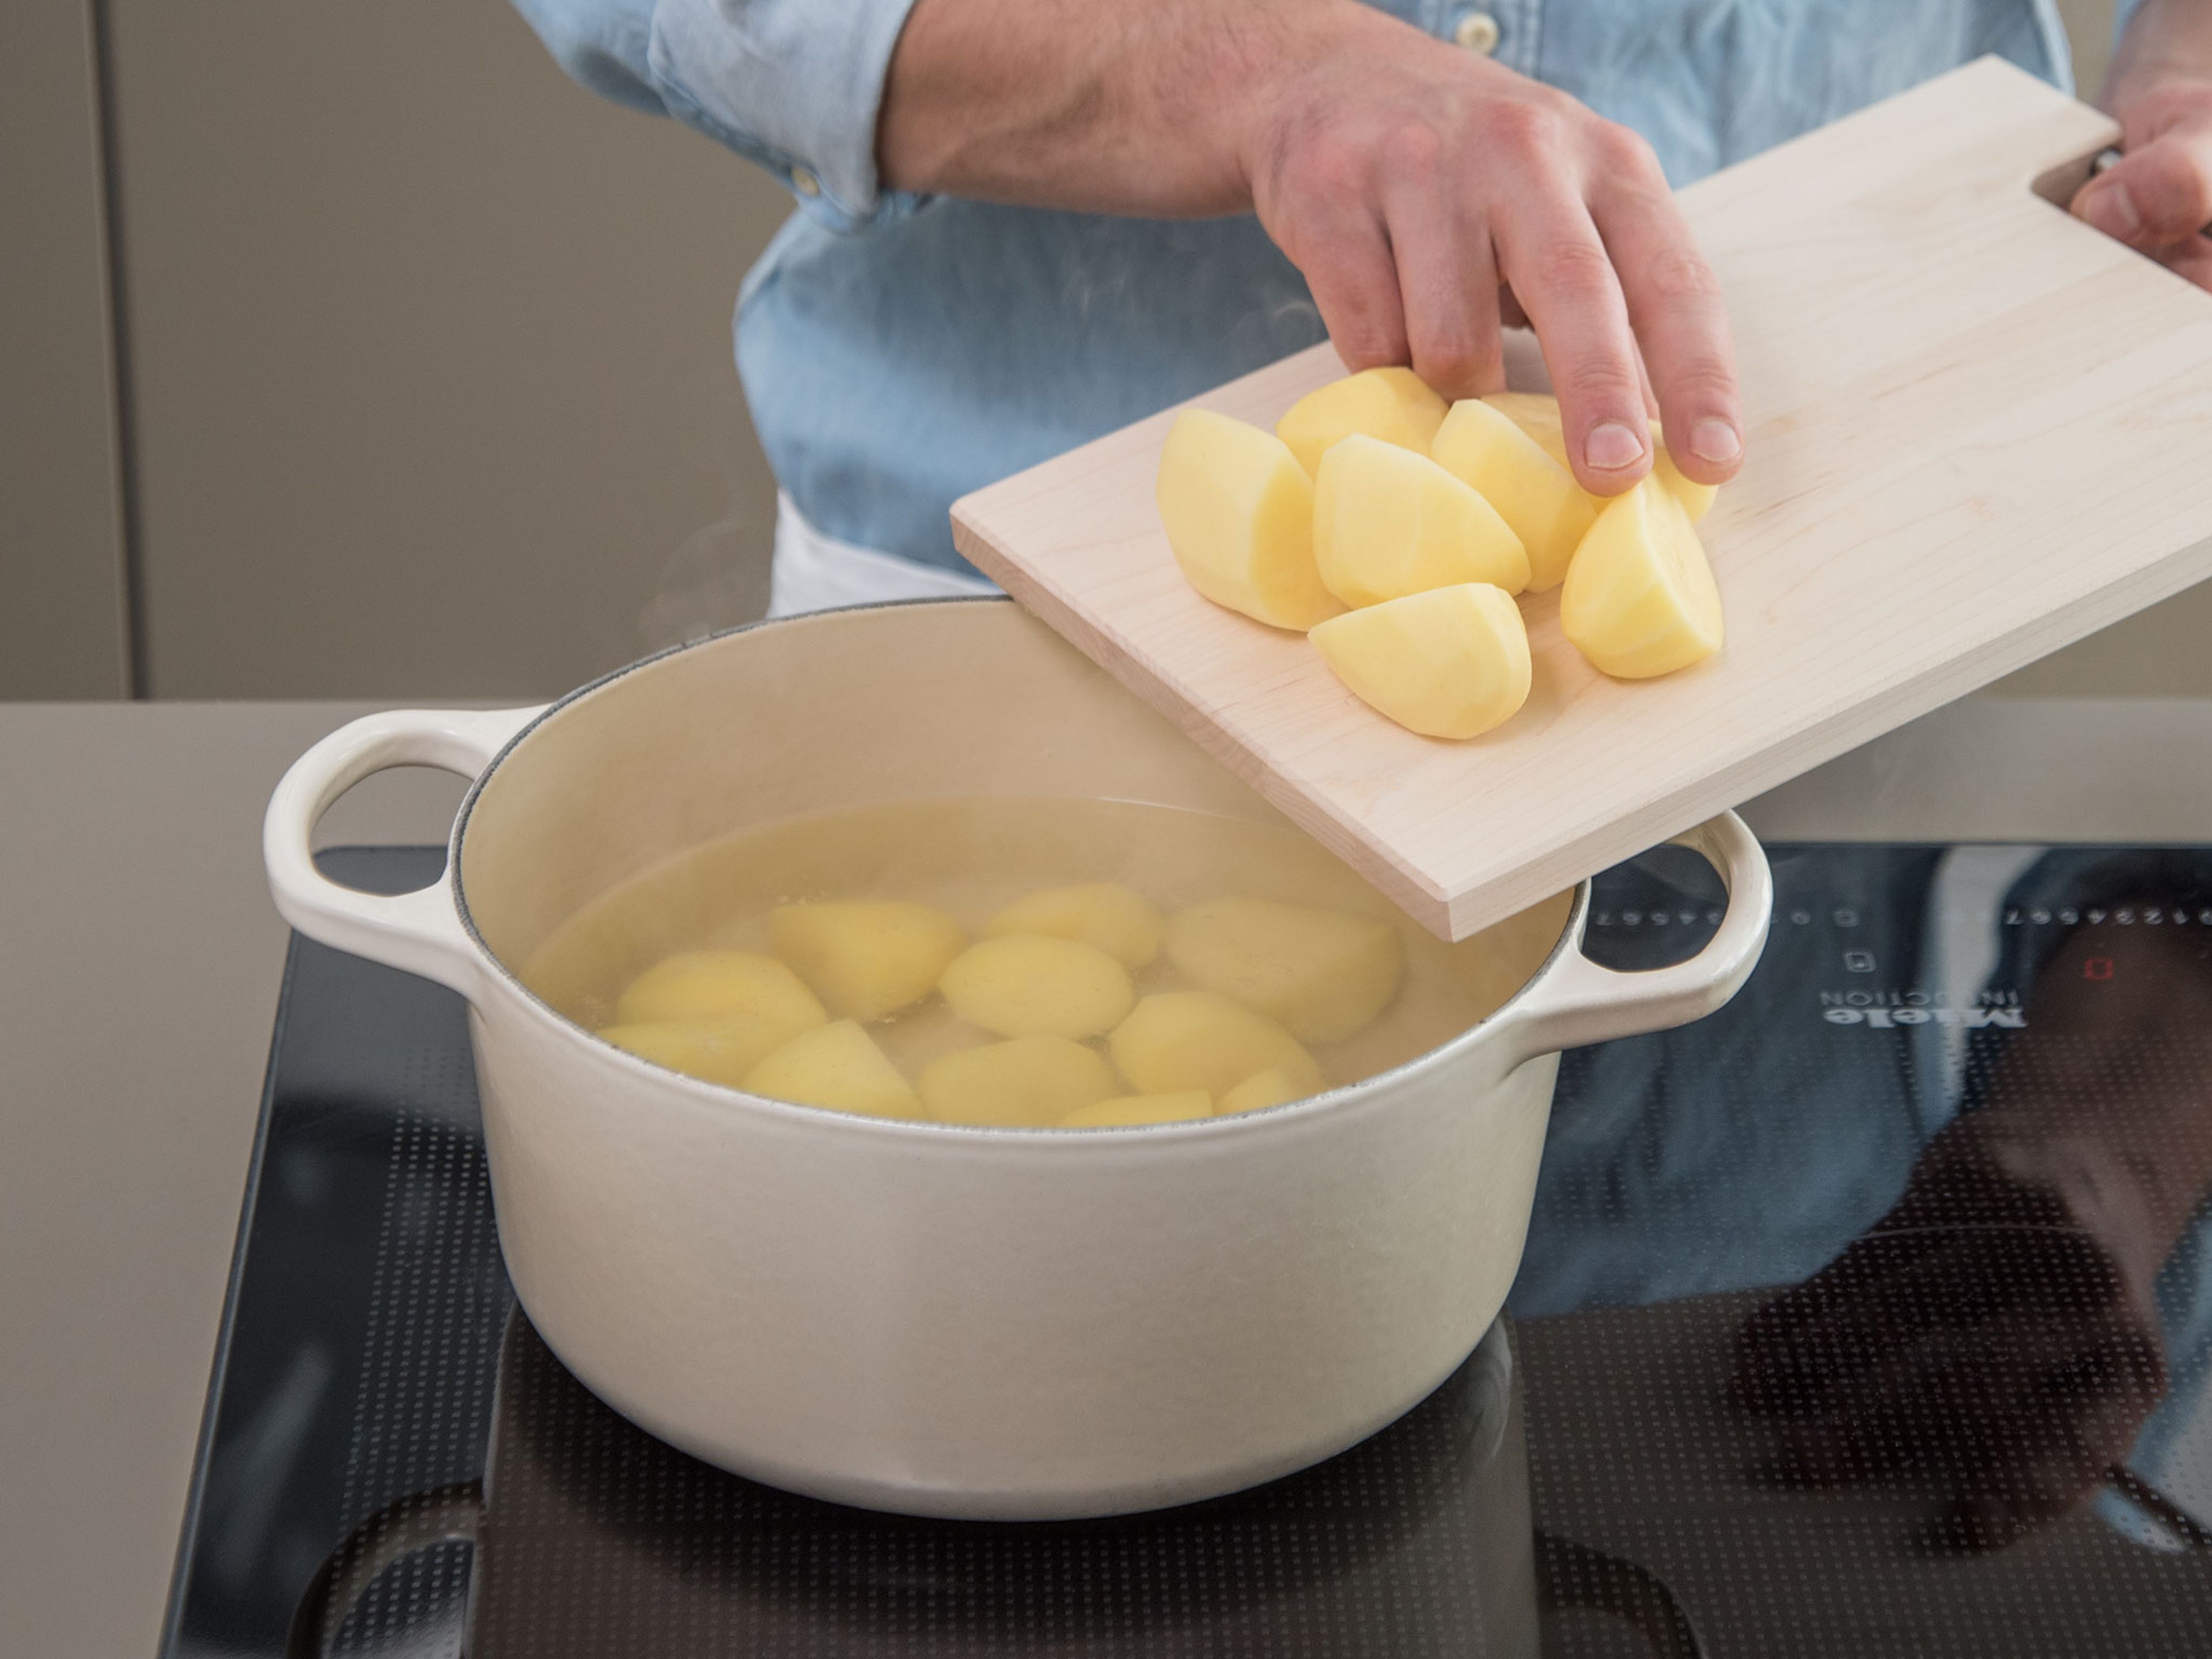 Peel and quarter potatoes. In a large pot, bring salted water to a boil, then add potatoes. Cook for approx. 20 min., or until potatoes are knife tender. Drain and keep warm.